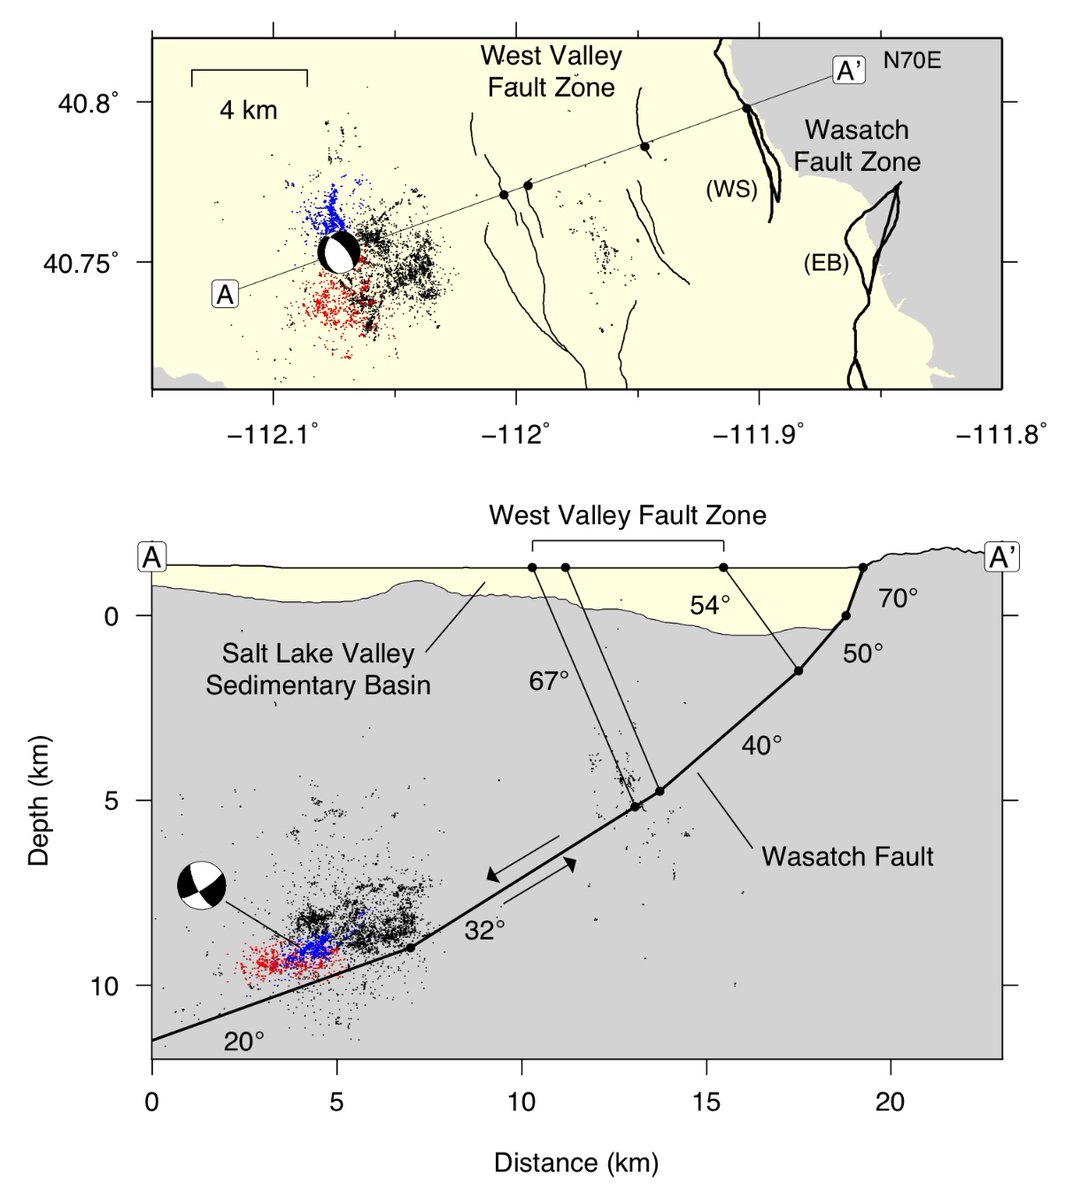 occurred beneath Magna, Utah. We analyzed the first ~6 weeks of seismic data following the mainshock and found that the aftershocks formed a shallow-dipping planar structure at depths of 9–12 km, implying that this segment of the Wasatch fault zone has a curved shape. (2/3)